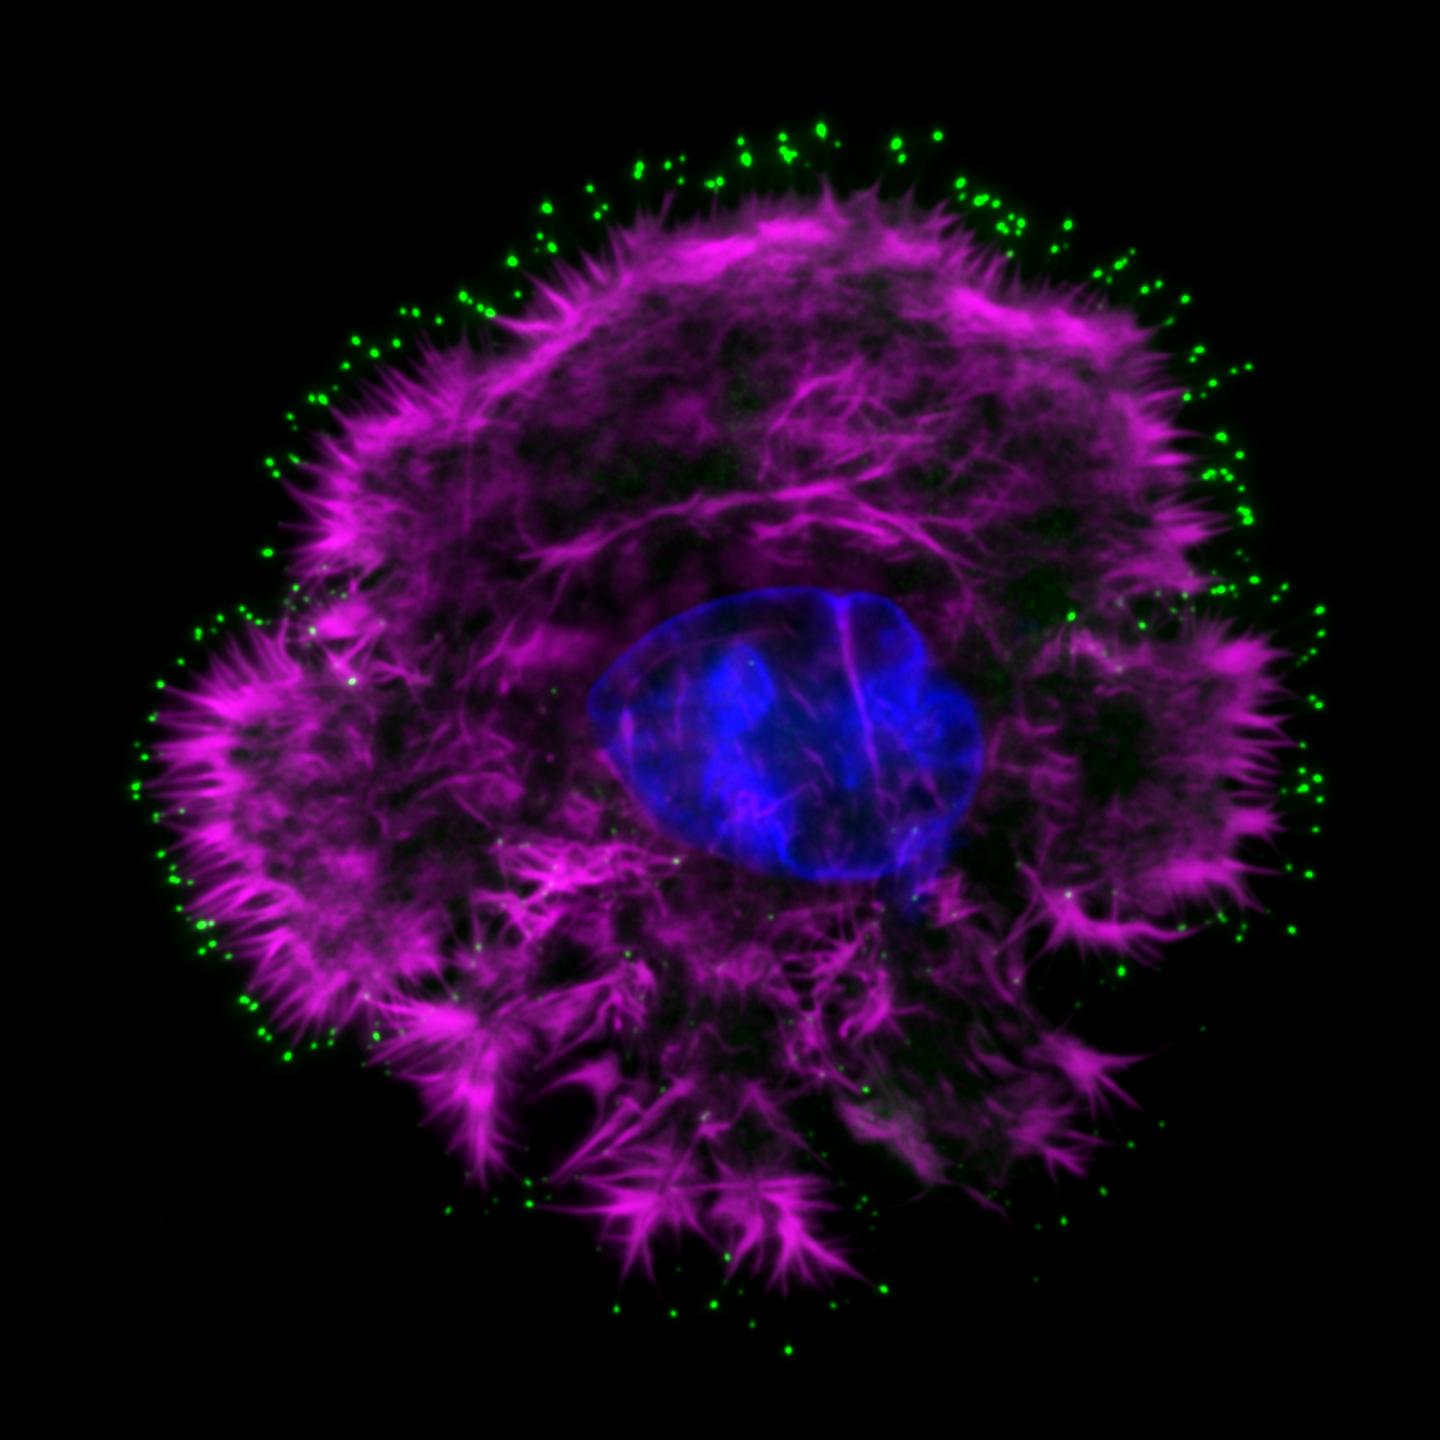 High-Resolution Microscope Image of an Invasive Breast Cancer Cell